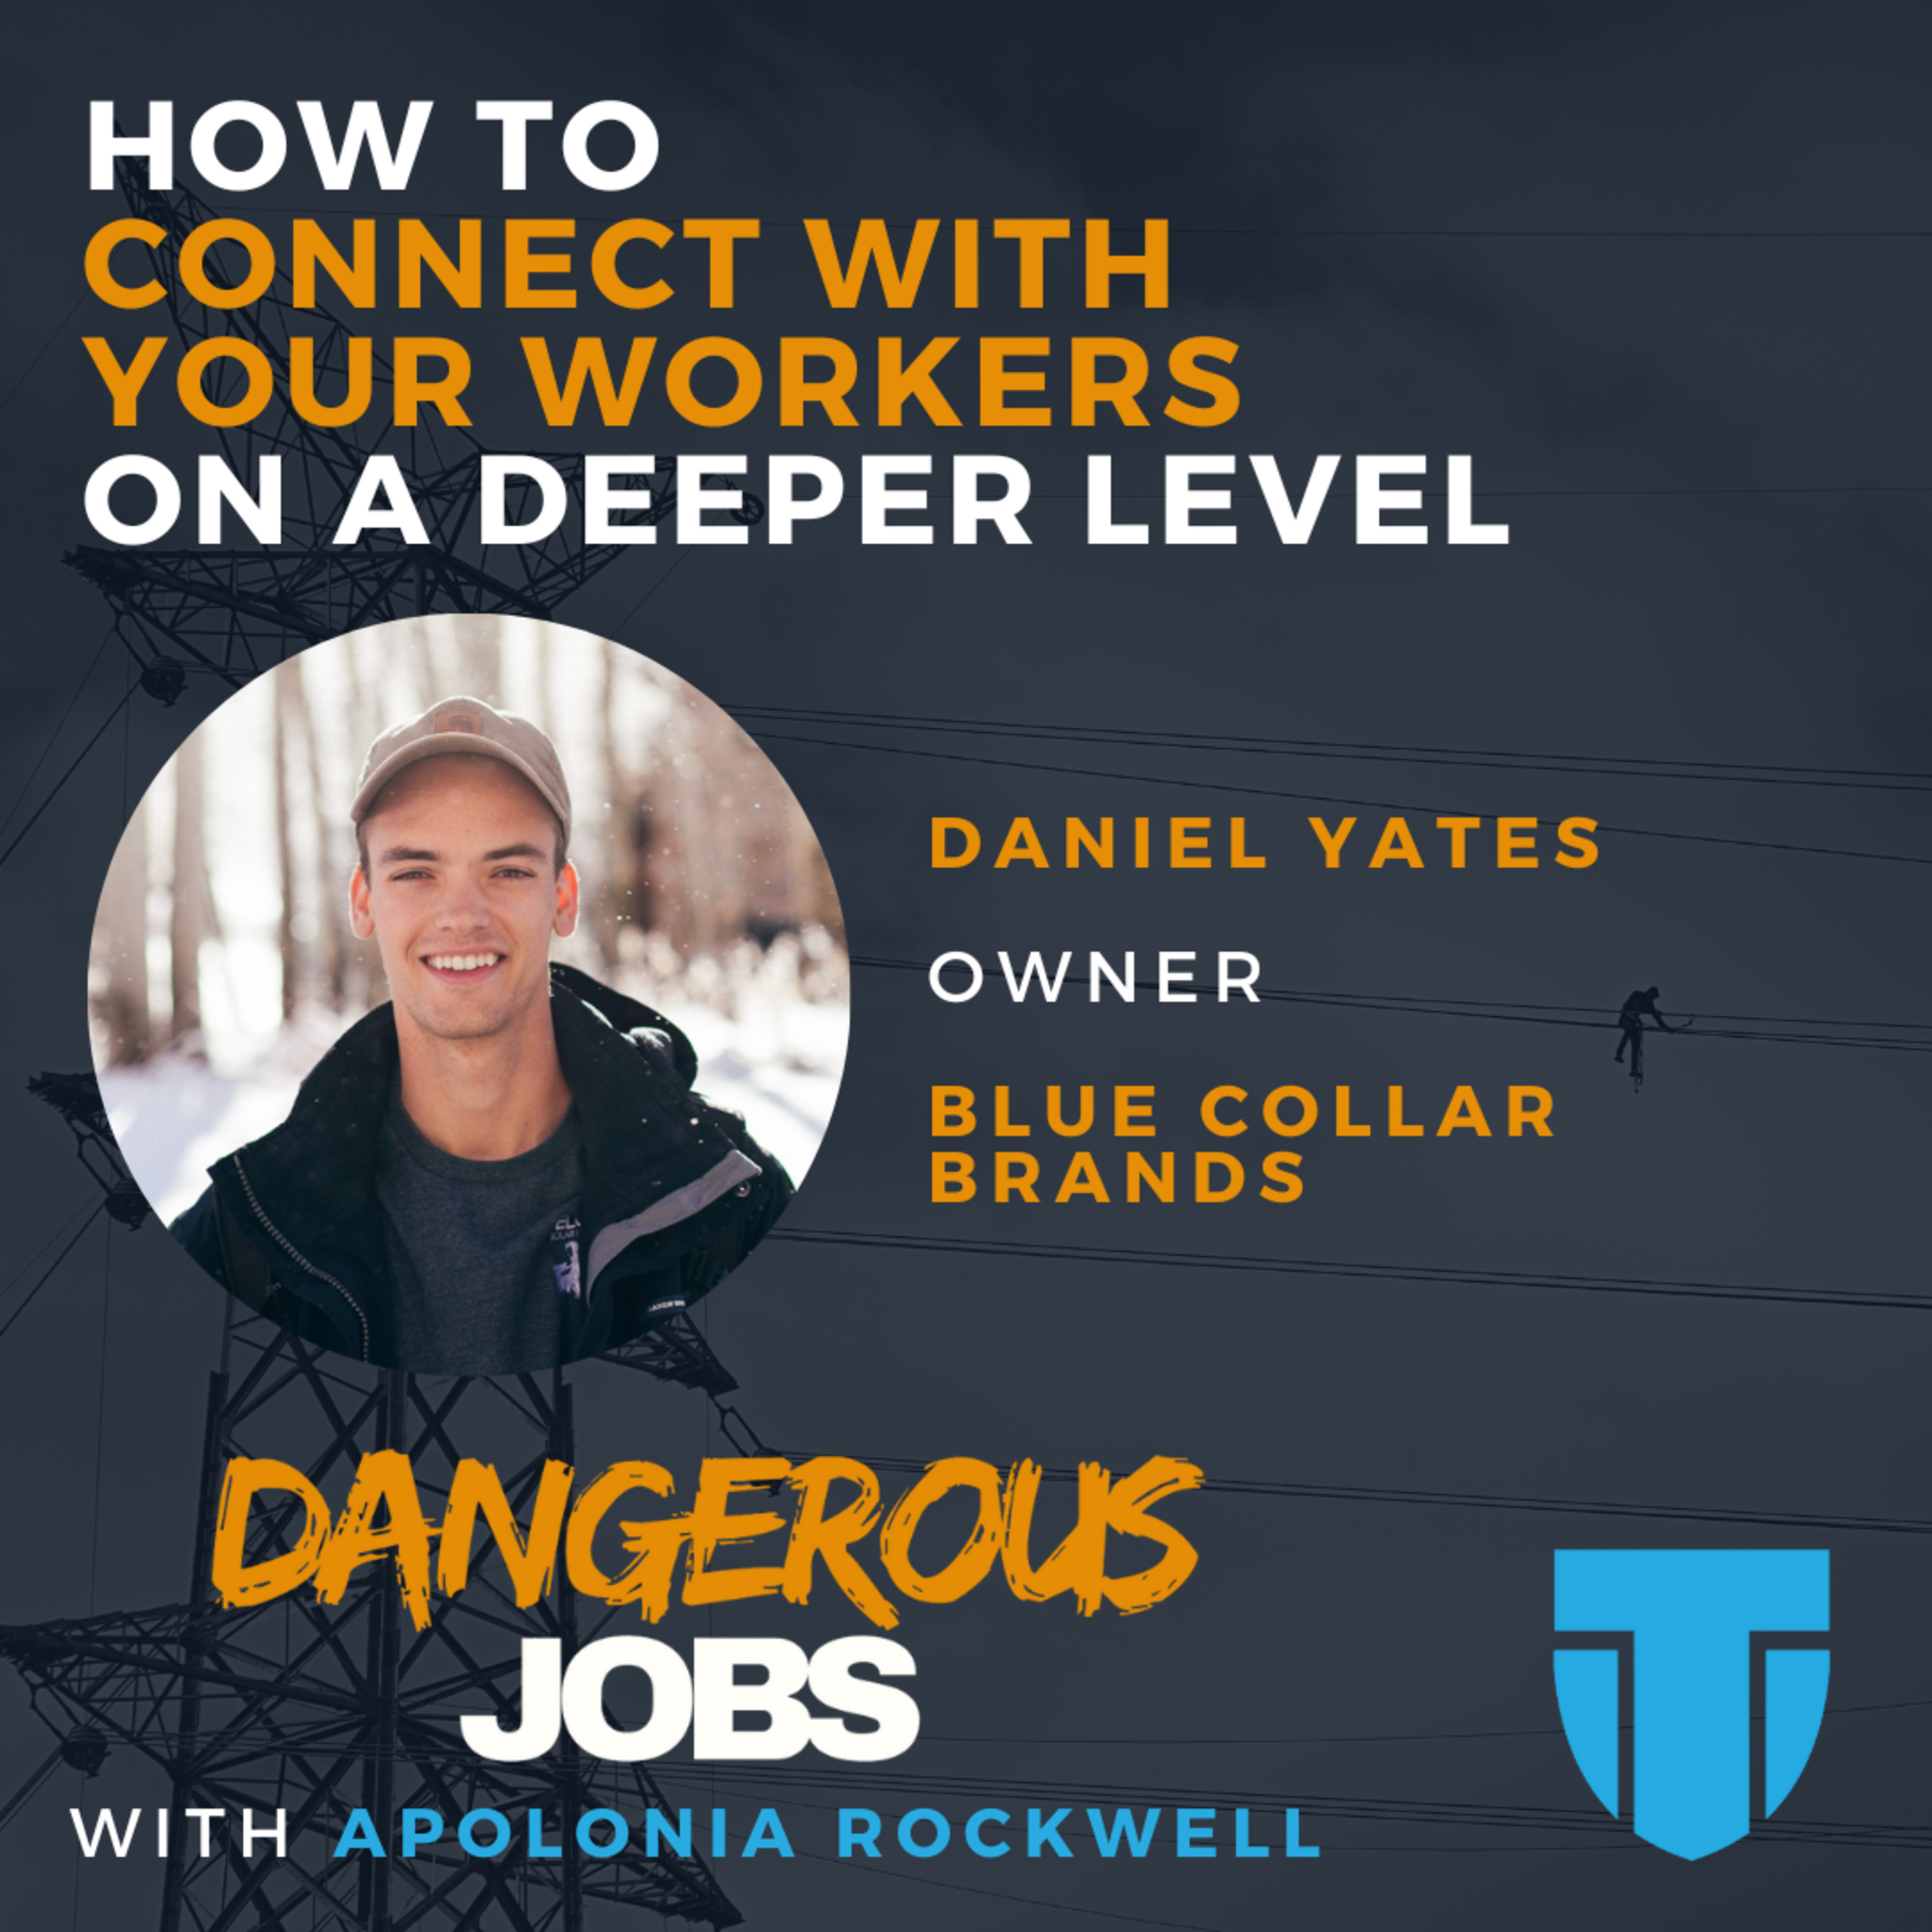 Lead With Understanding: How to Connect With Your Workers on a Deeper Level with Daniel Yates